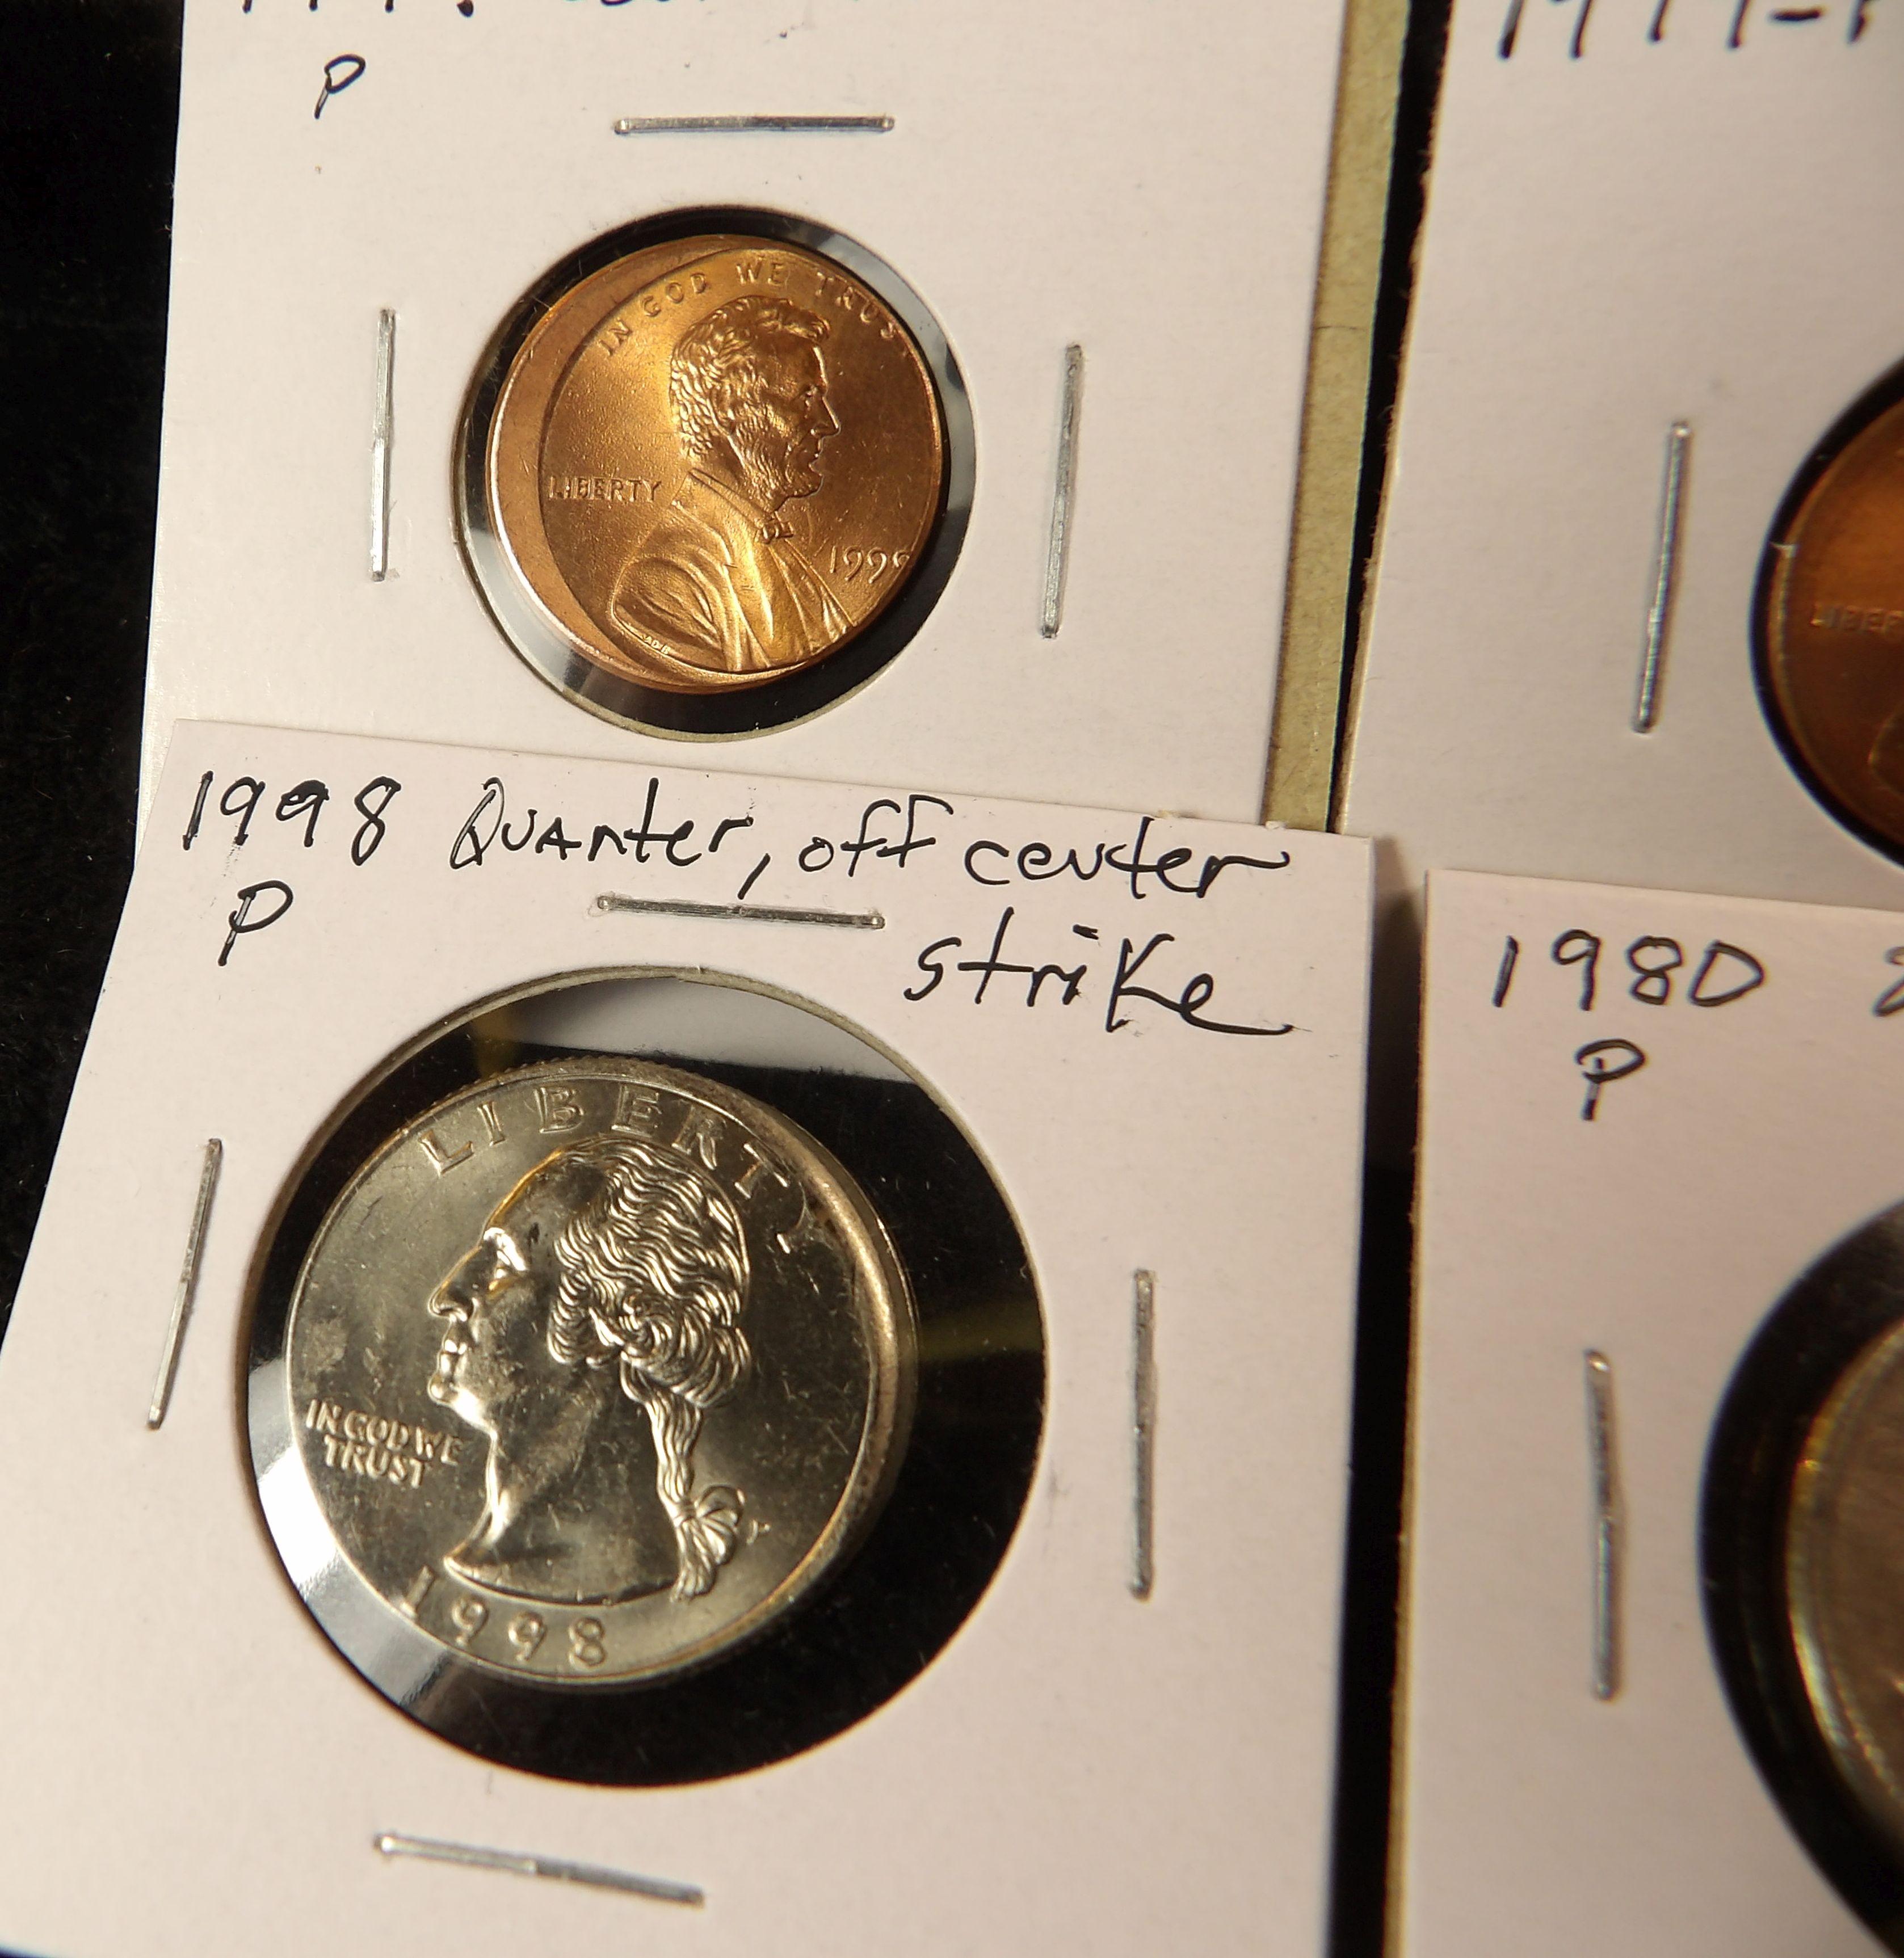 Errors: 1990, 1998, 199? Lincoln Cents all off Center and BU; 1999 P Cent, Braodstruck; 1999 P Dime